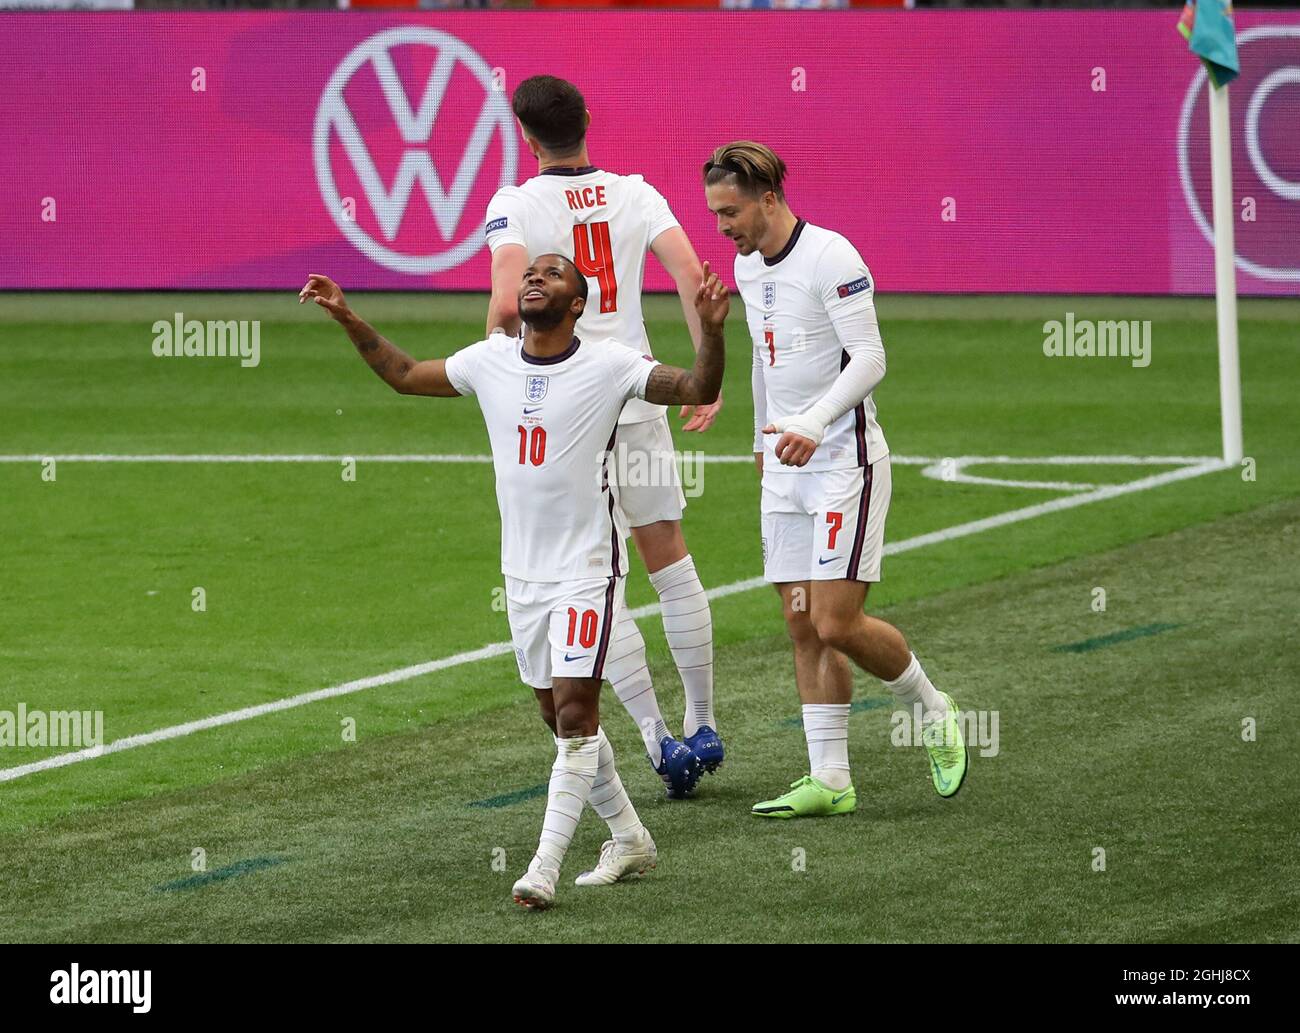 London, England, 22nd June 2021. Raheem Sterling of England celebrates scoring the first goal during the UEFA European Championships match at Wembley Stadium, London. Picture credit should read: David Klein / Sportimage via PA Images Stock Photo